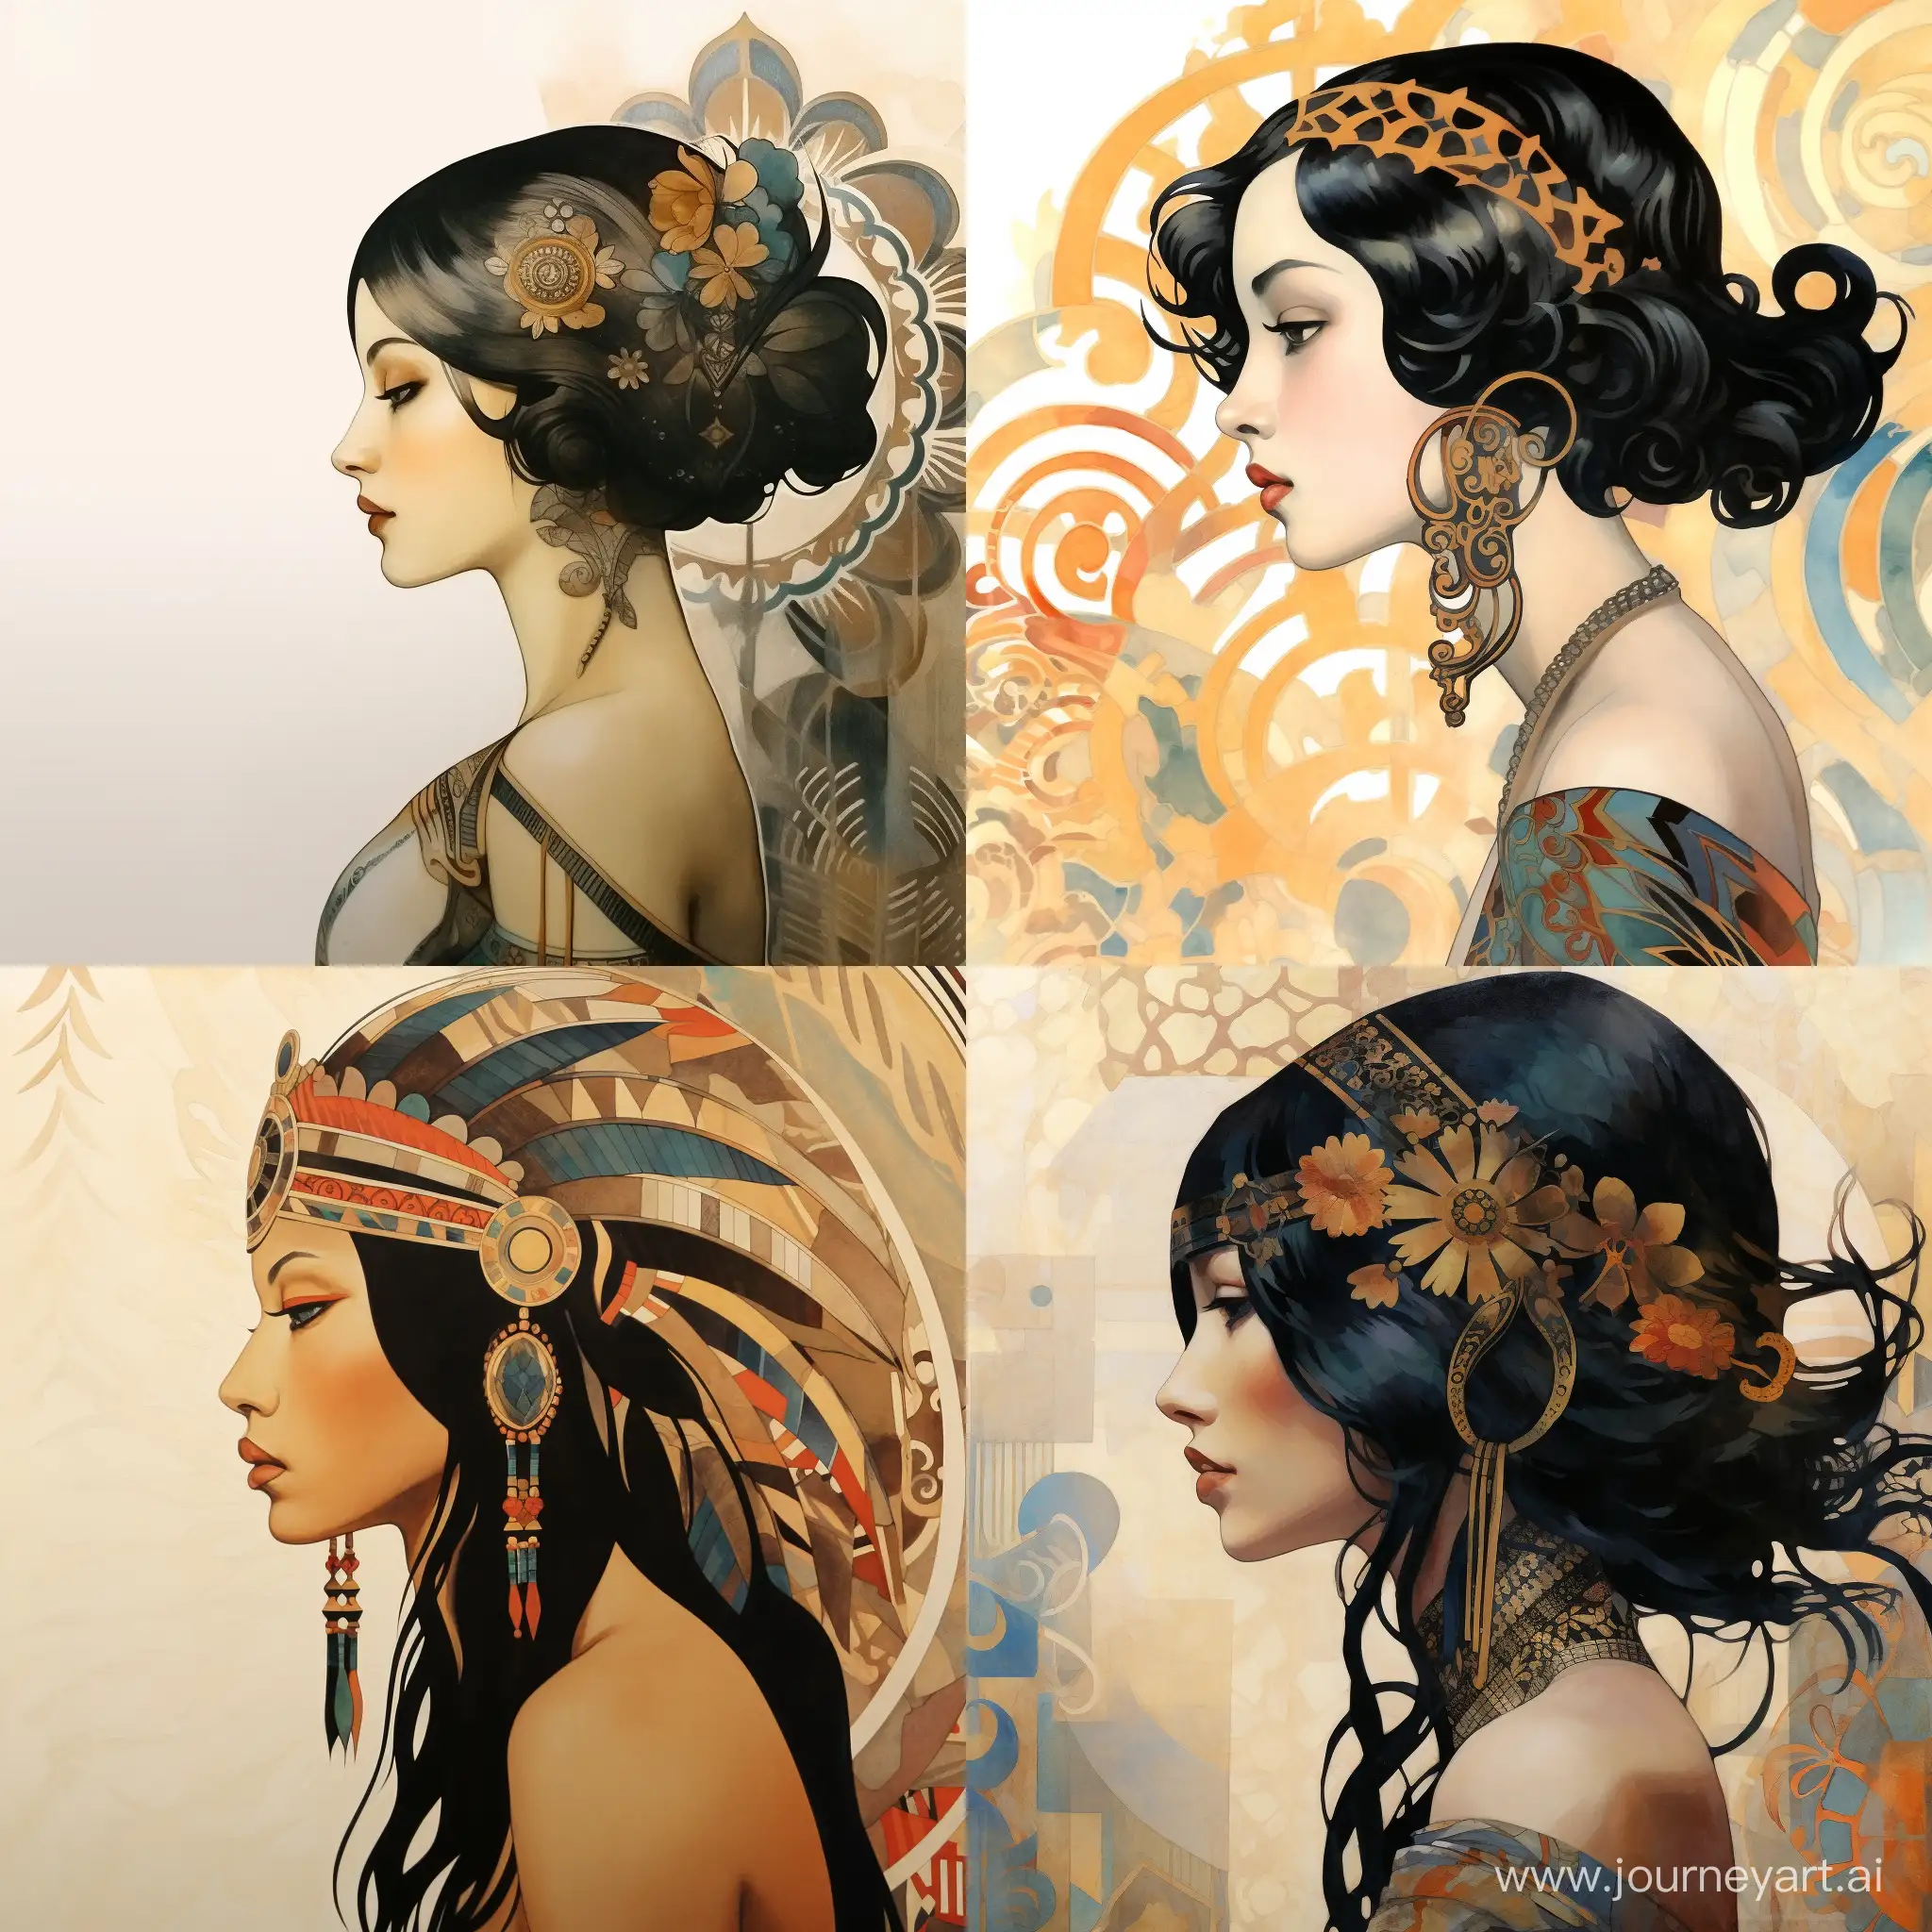 In a golden crown, black-haired woman, in profile, portrait, on the background of the pattern of clubs, fairy-tale illustration, stylized, style of Nikolai Roerich, watercolor, graphics, decoratively